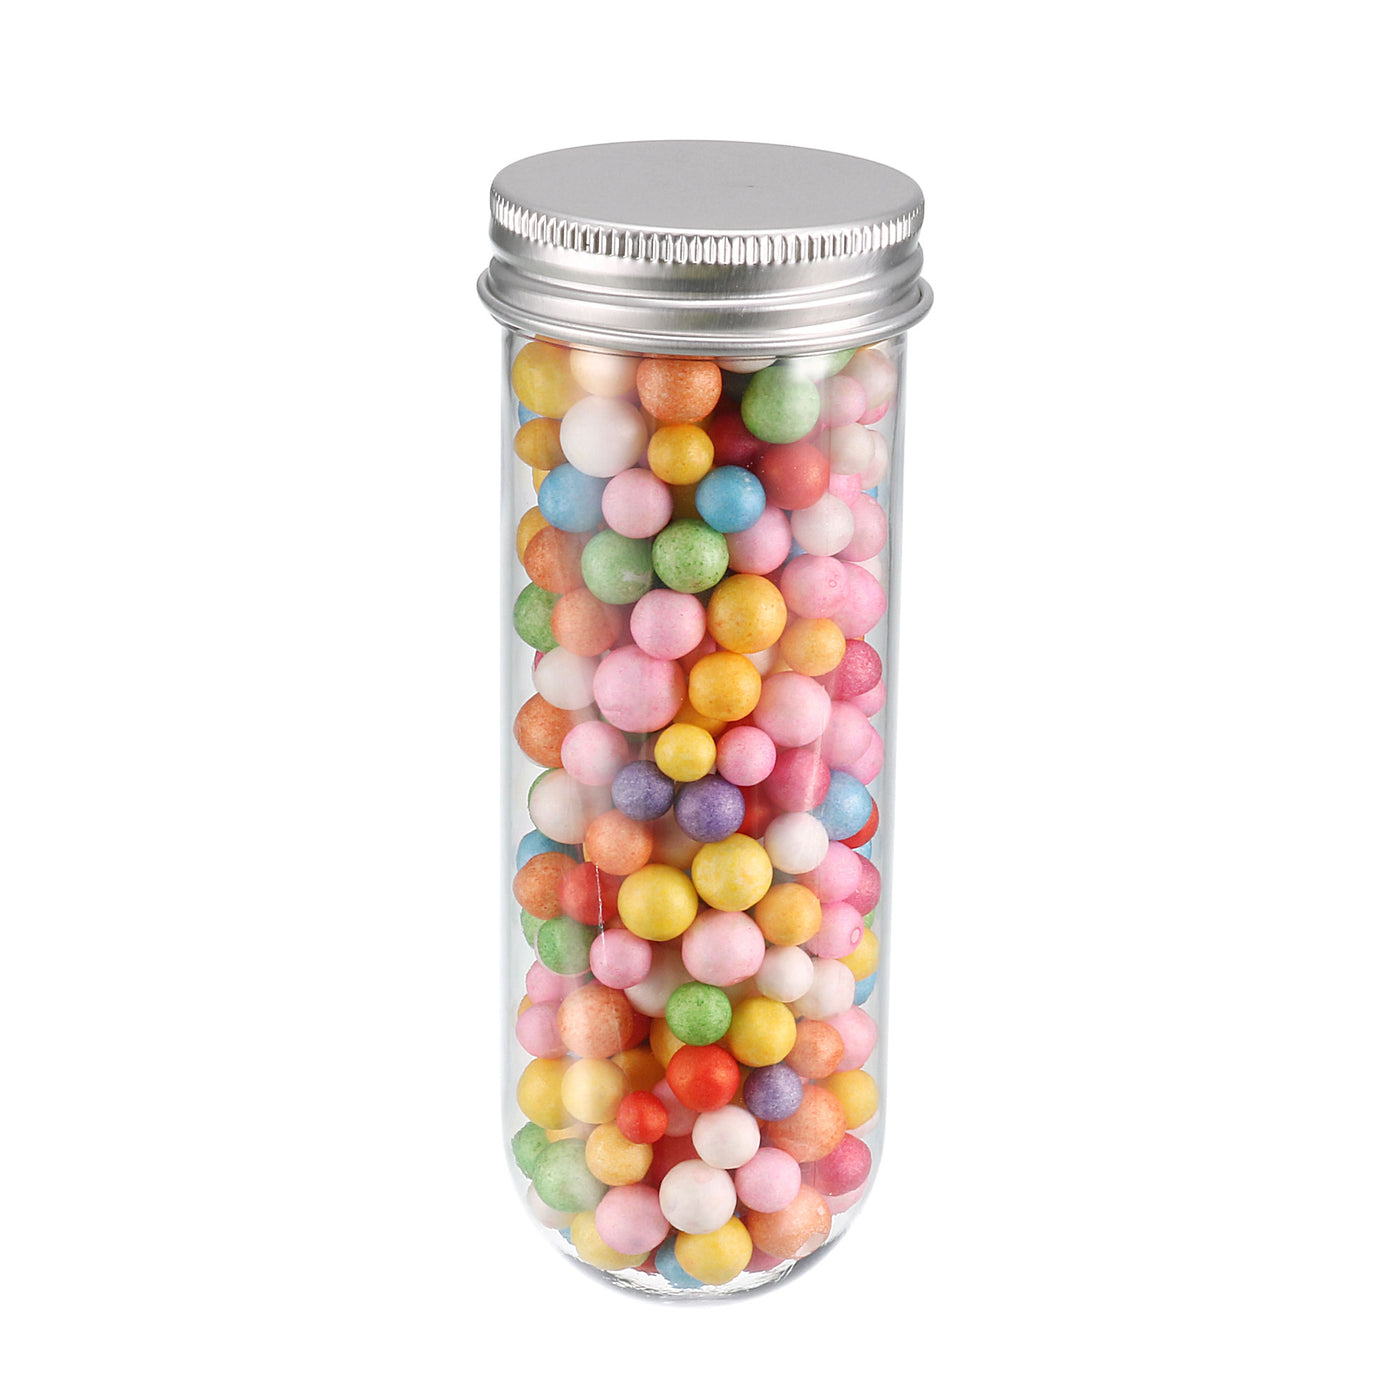 Uxcell Uxcell 4 Packs 0.3" Mixed Color Polystyrene Foam Round Balls Beads for Crafts, Fillings